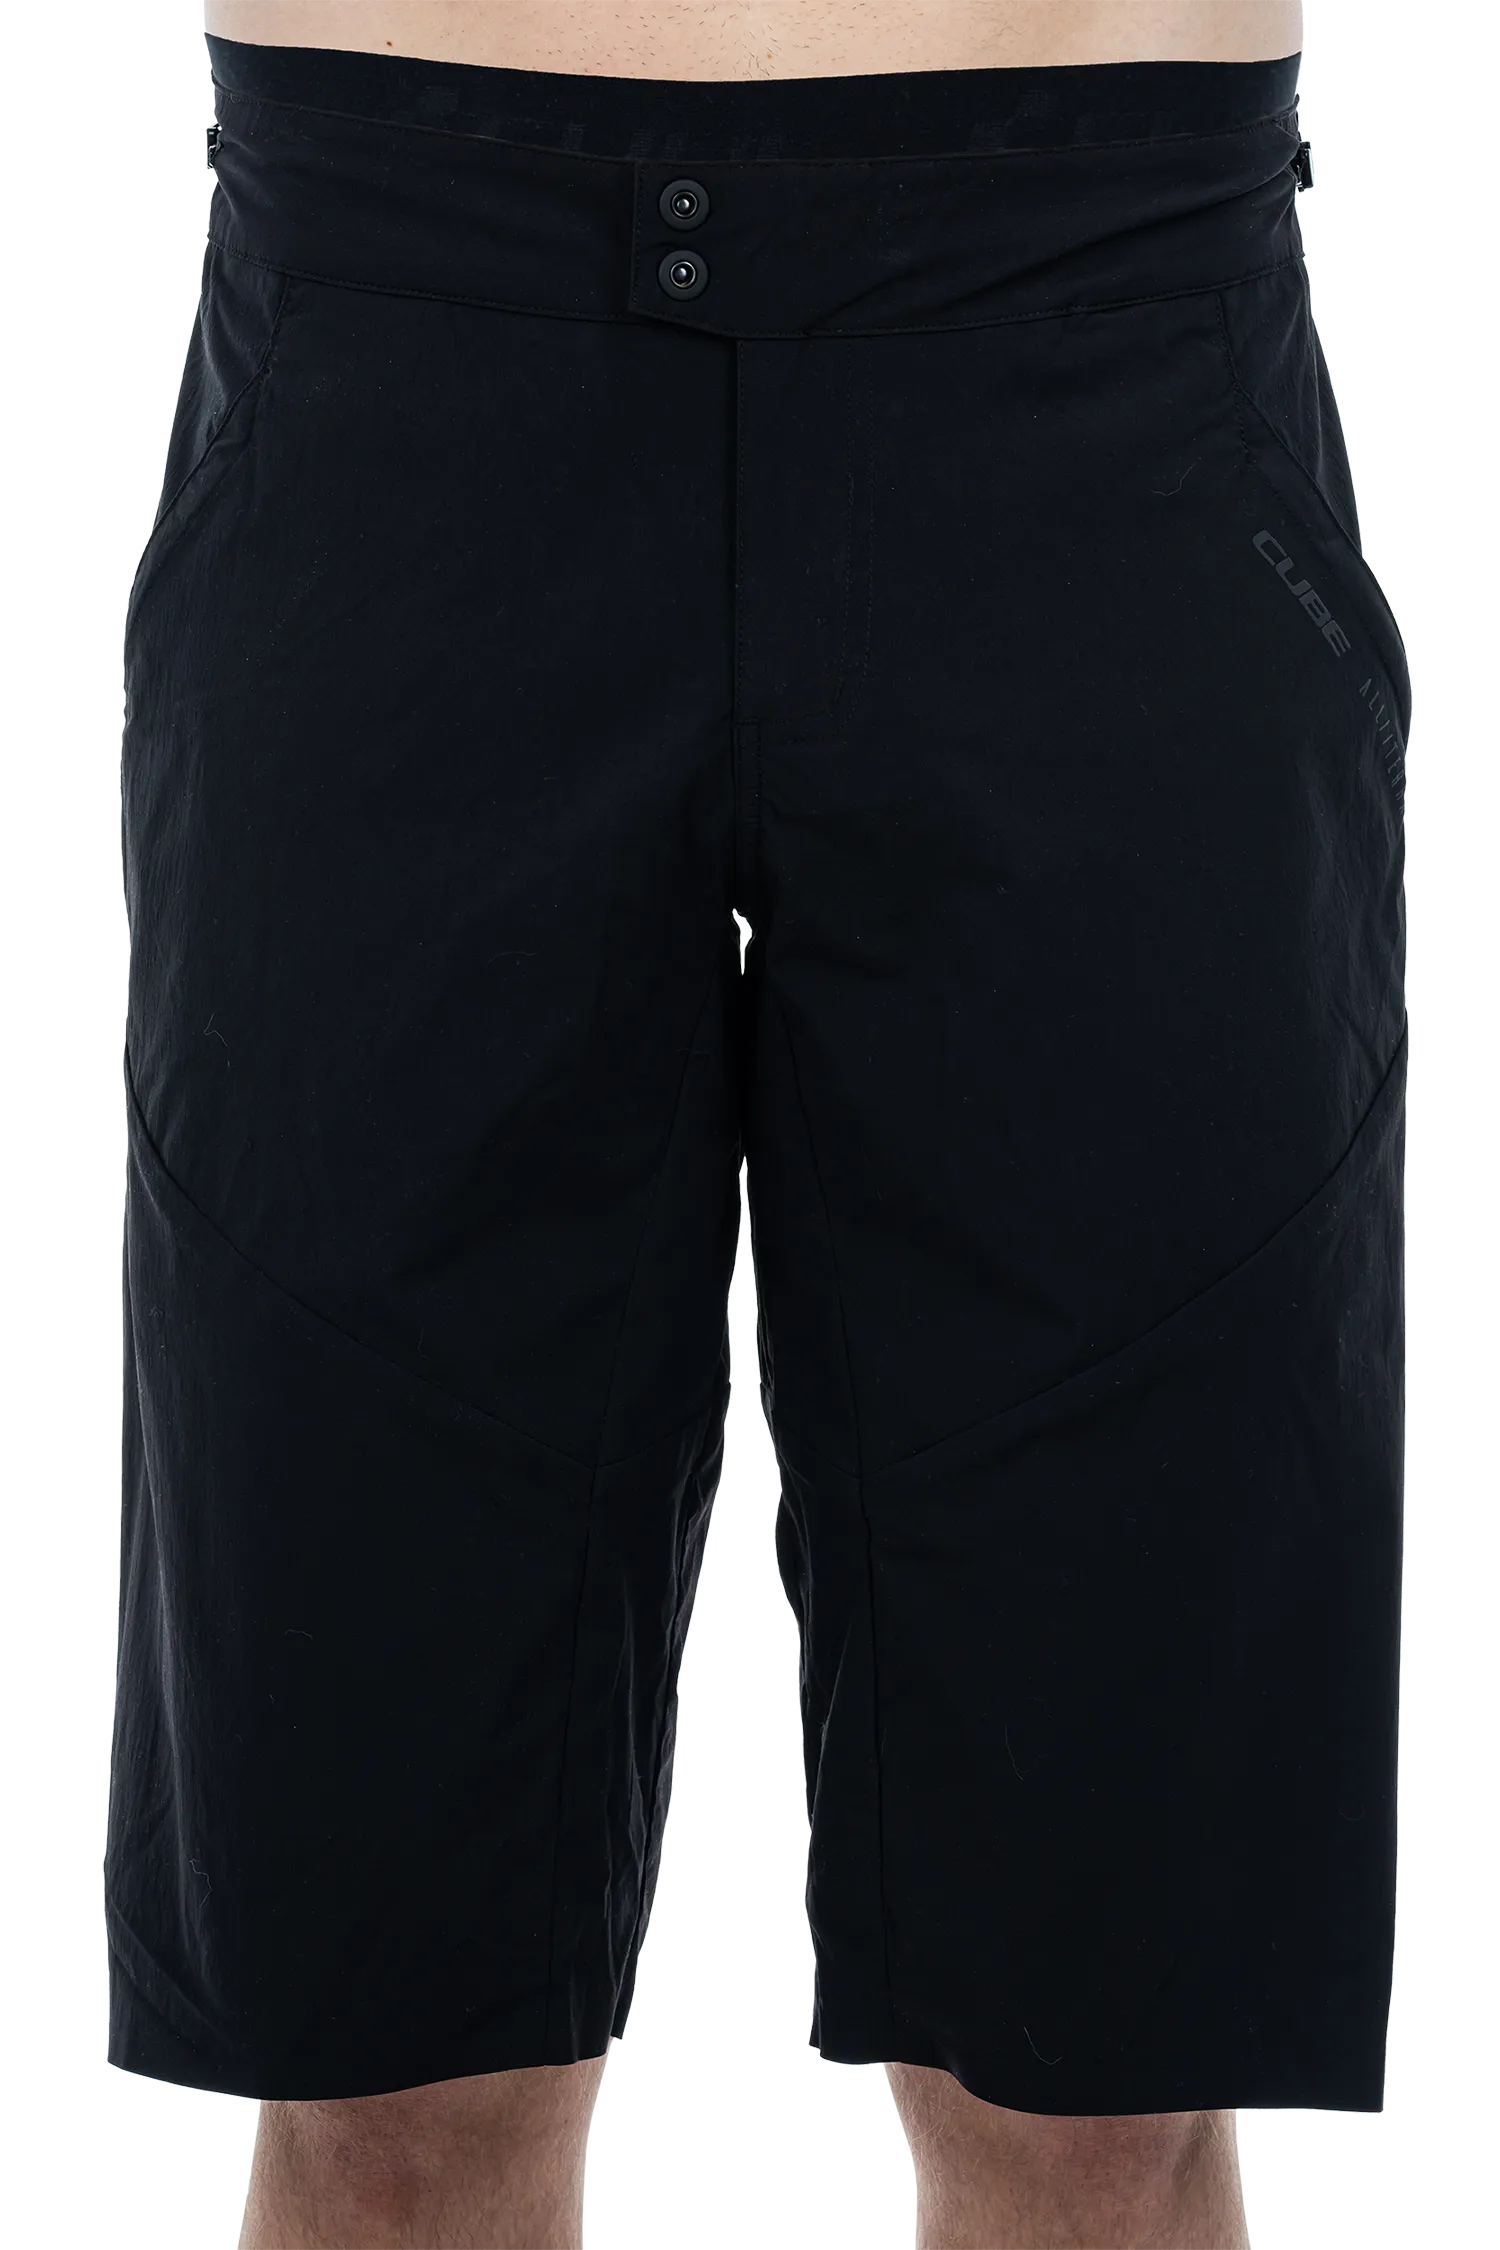 CUBE ATX Baggy Shorts inkl. Innenhose